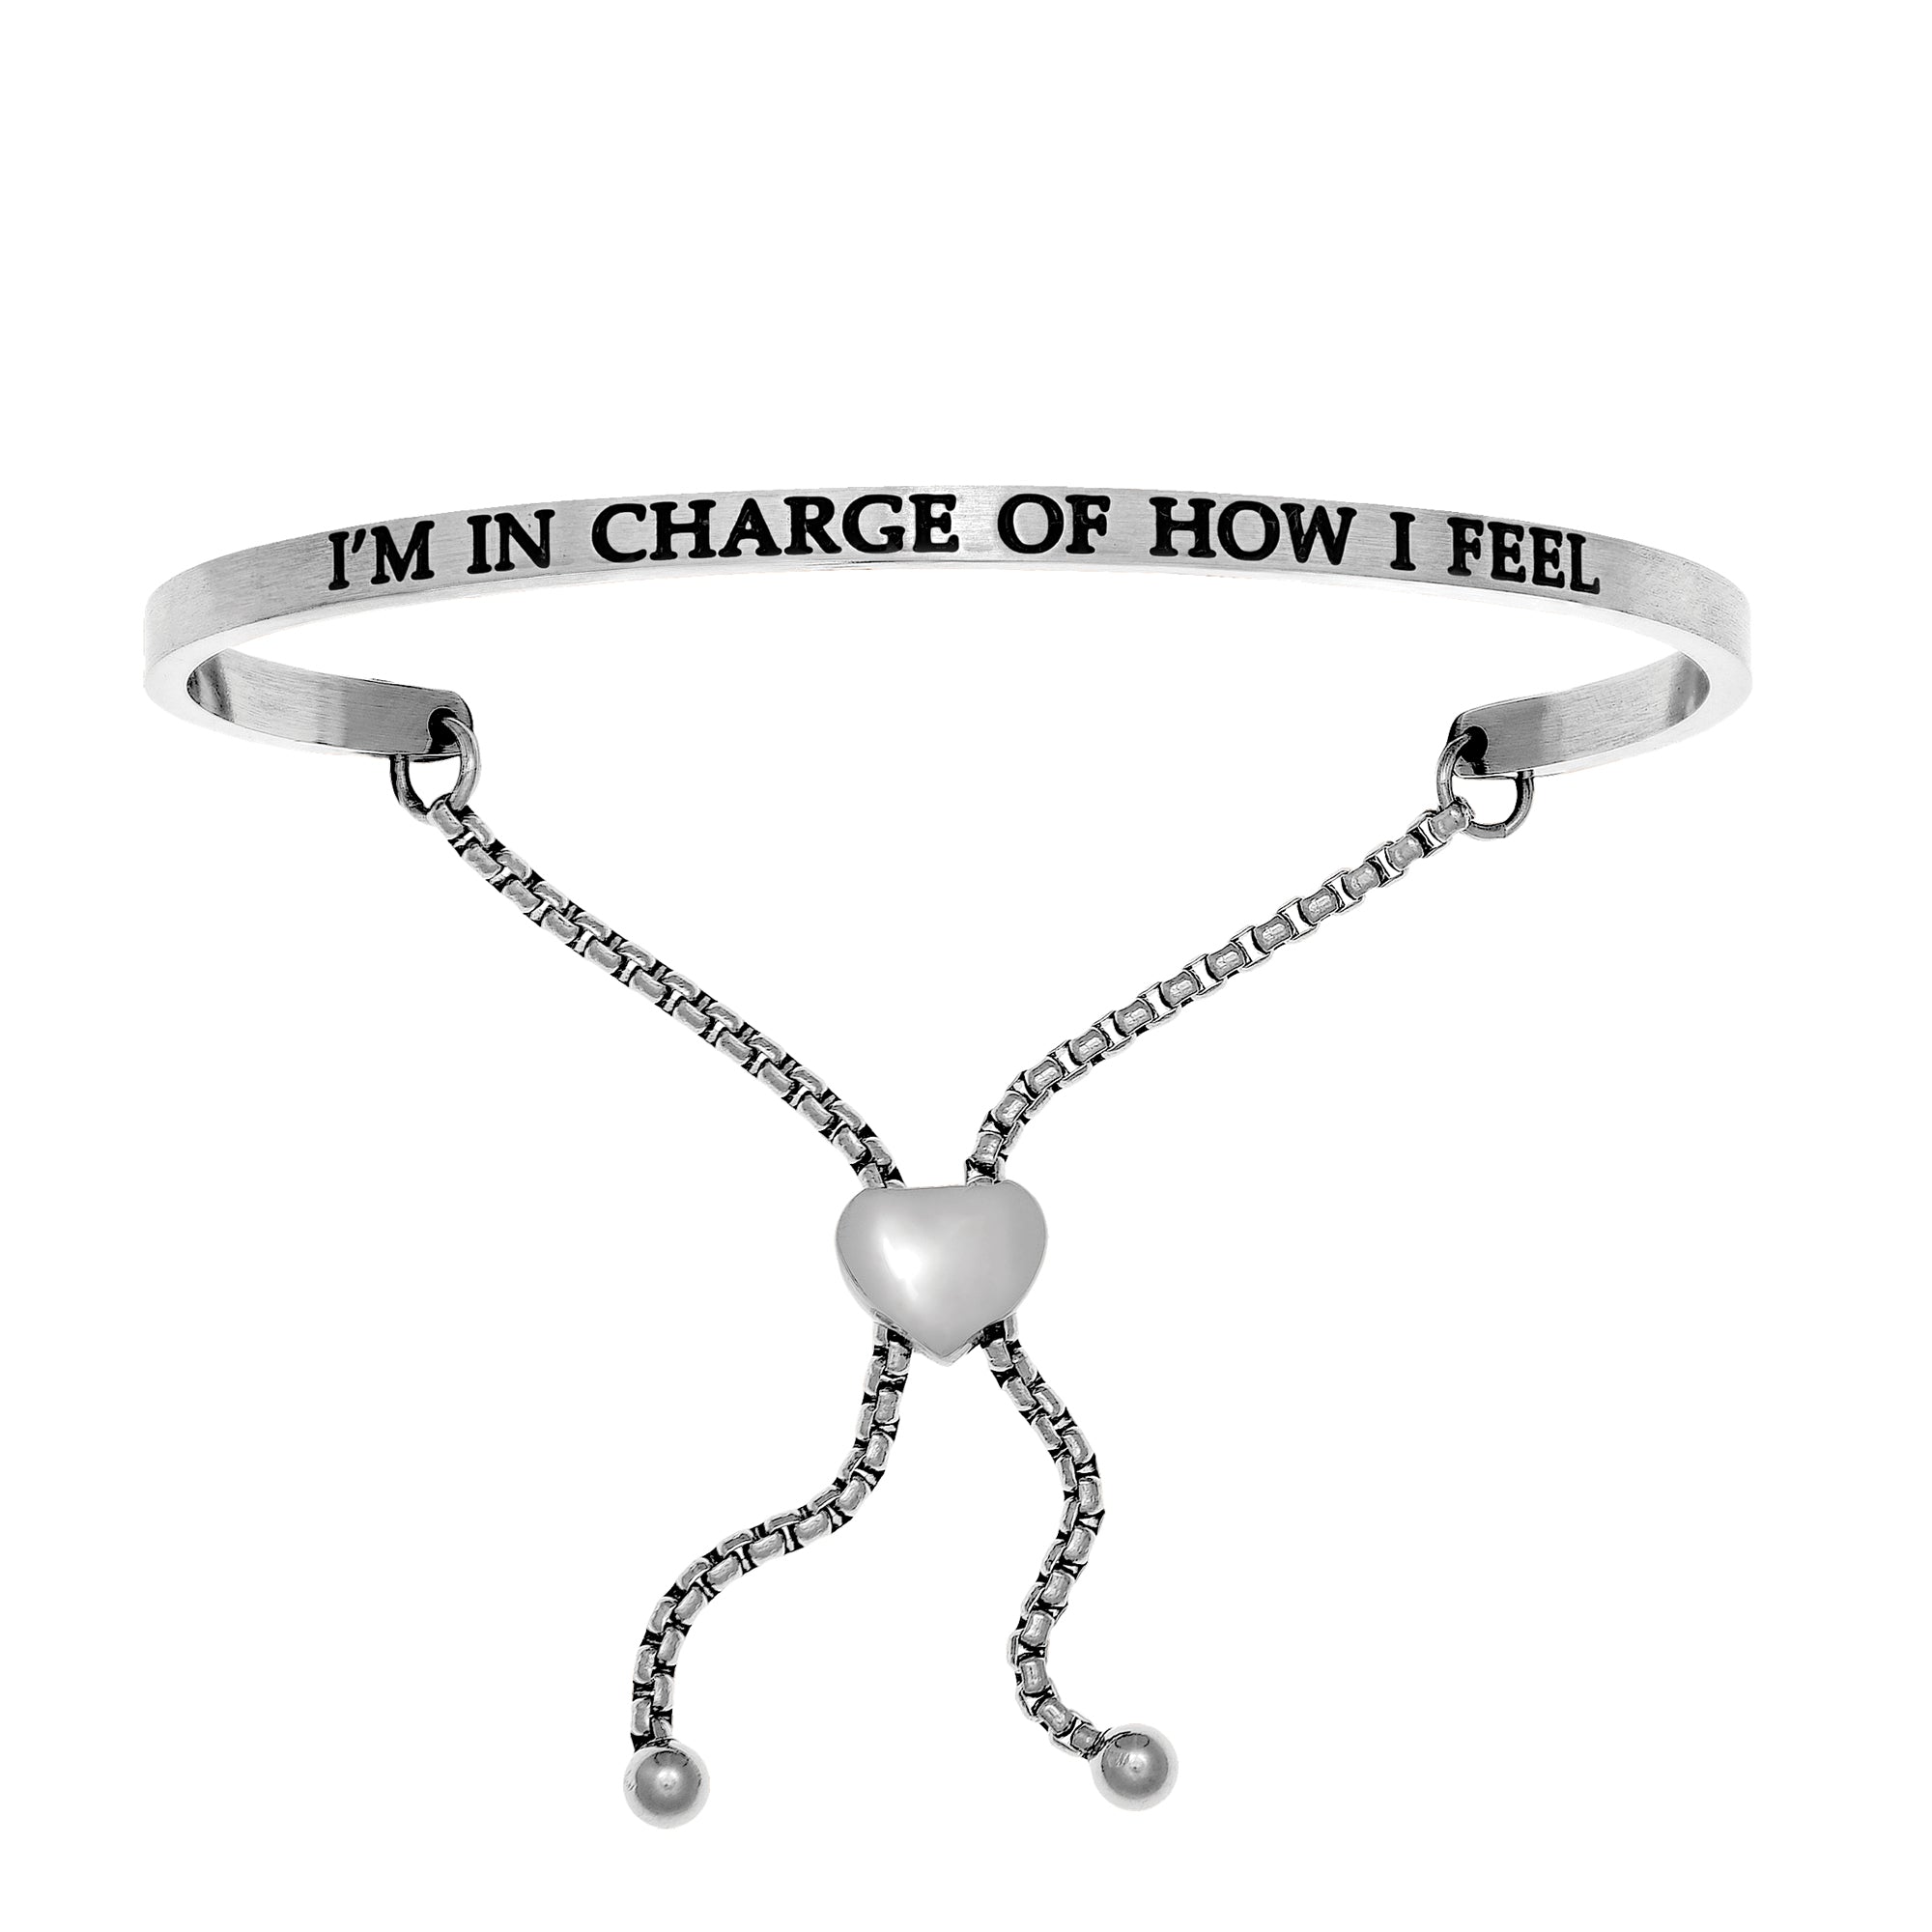 Intuitions Stainless Steel I'M IN CHARGE OF HOW I FEEL Diamond Accent Adjustable Bracelet